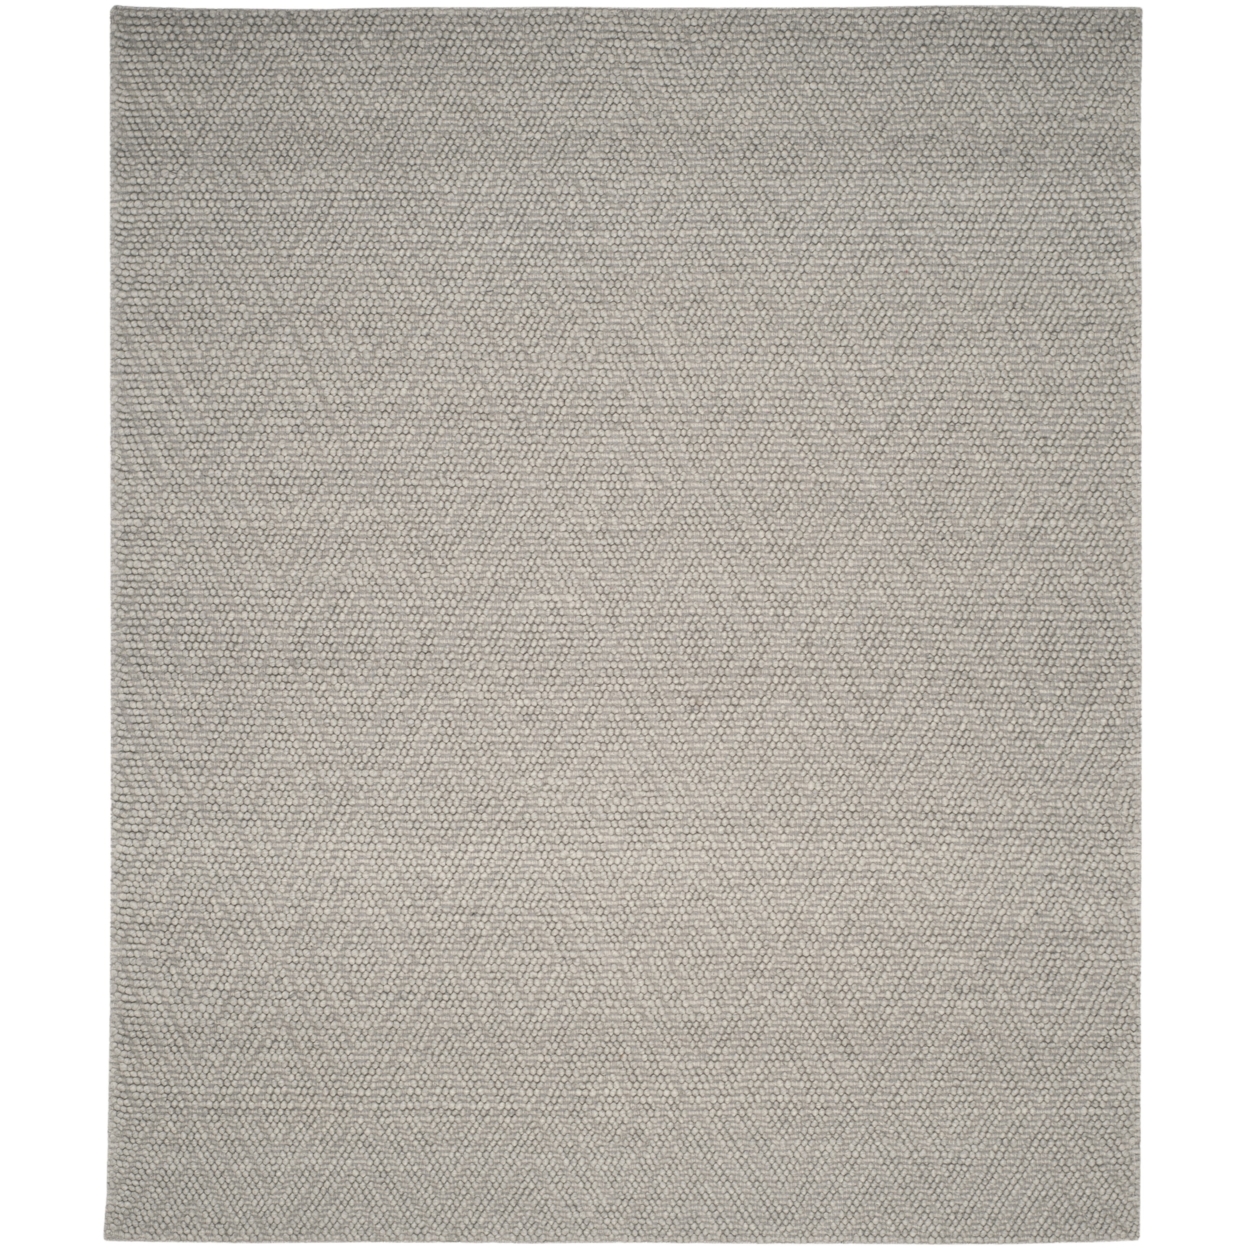 SAFAVIEH Natura Collection NAT623C Handwoven Silver Rug - 6' Square